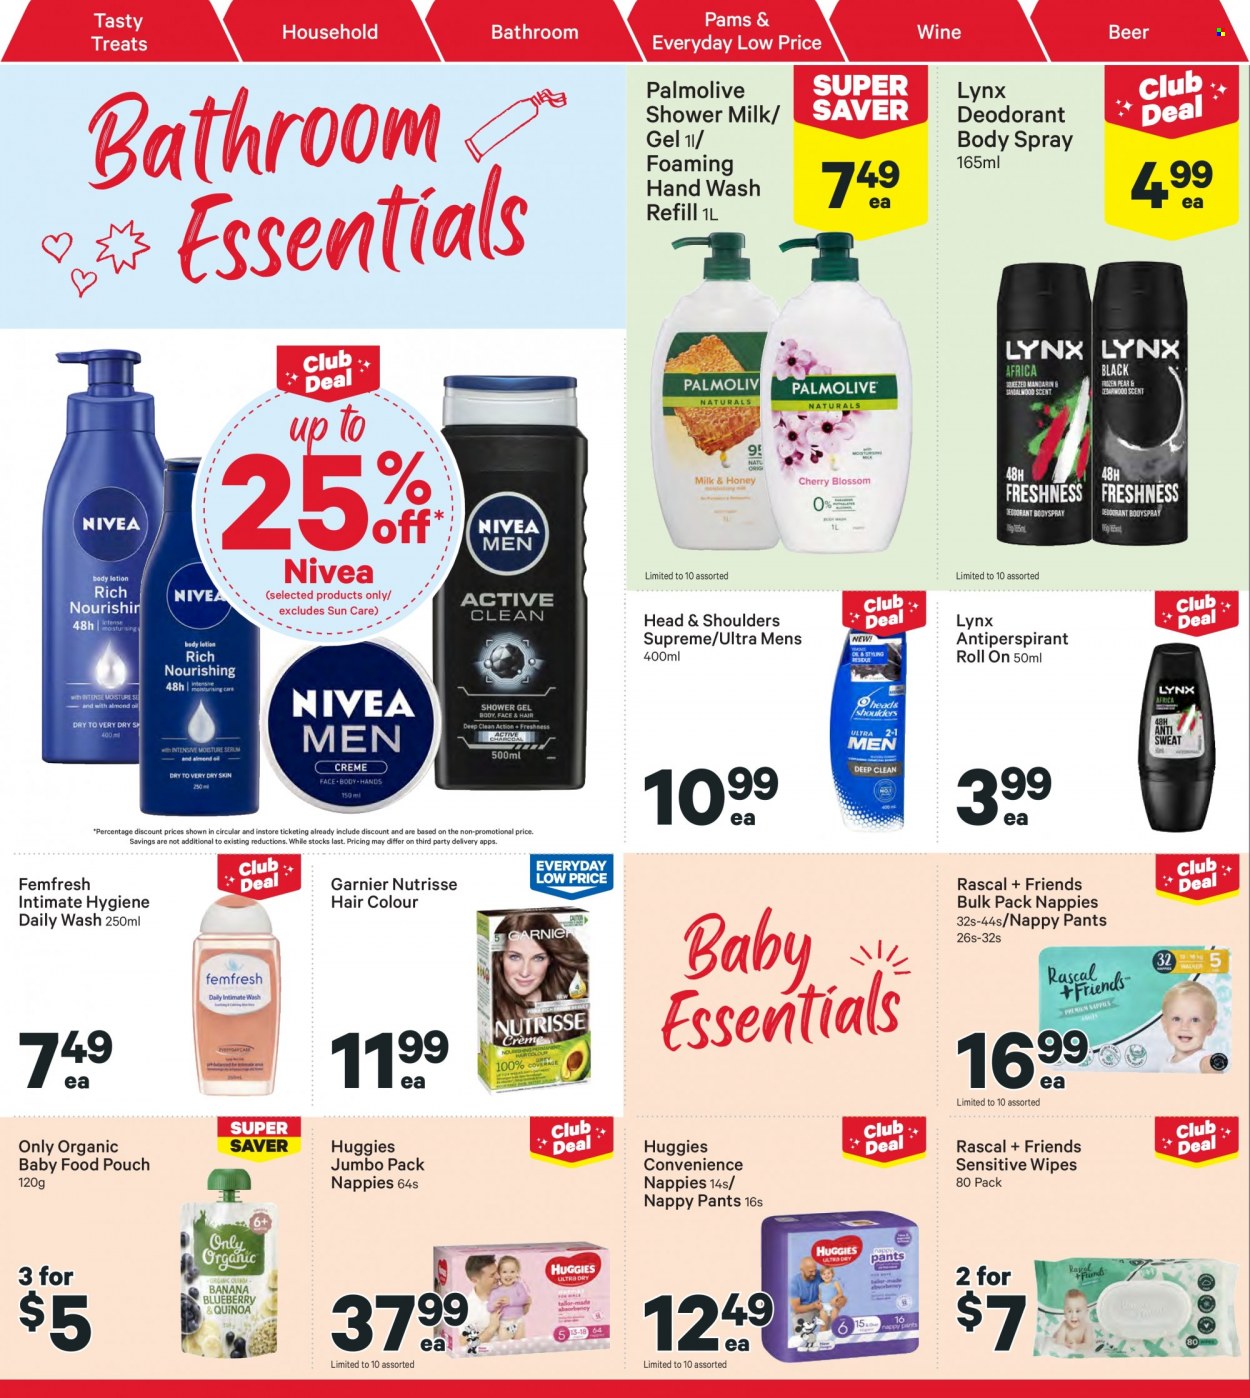 thumbnail - New World mailer - 27.03.2023 - 02.04.2023 - Sales products - milk, beer, baby food pouch, organic baby food, wipes, Huggies, pants, nappies, Nivea, hand wash, Palmolive, Garnier, Head & Shoulders, hair color, body spray, anti-perspirant, roll-on, deodorant. Page 30.